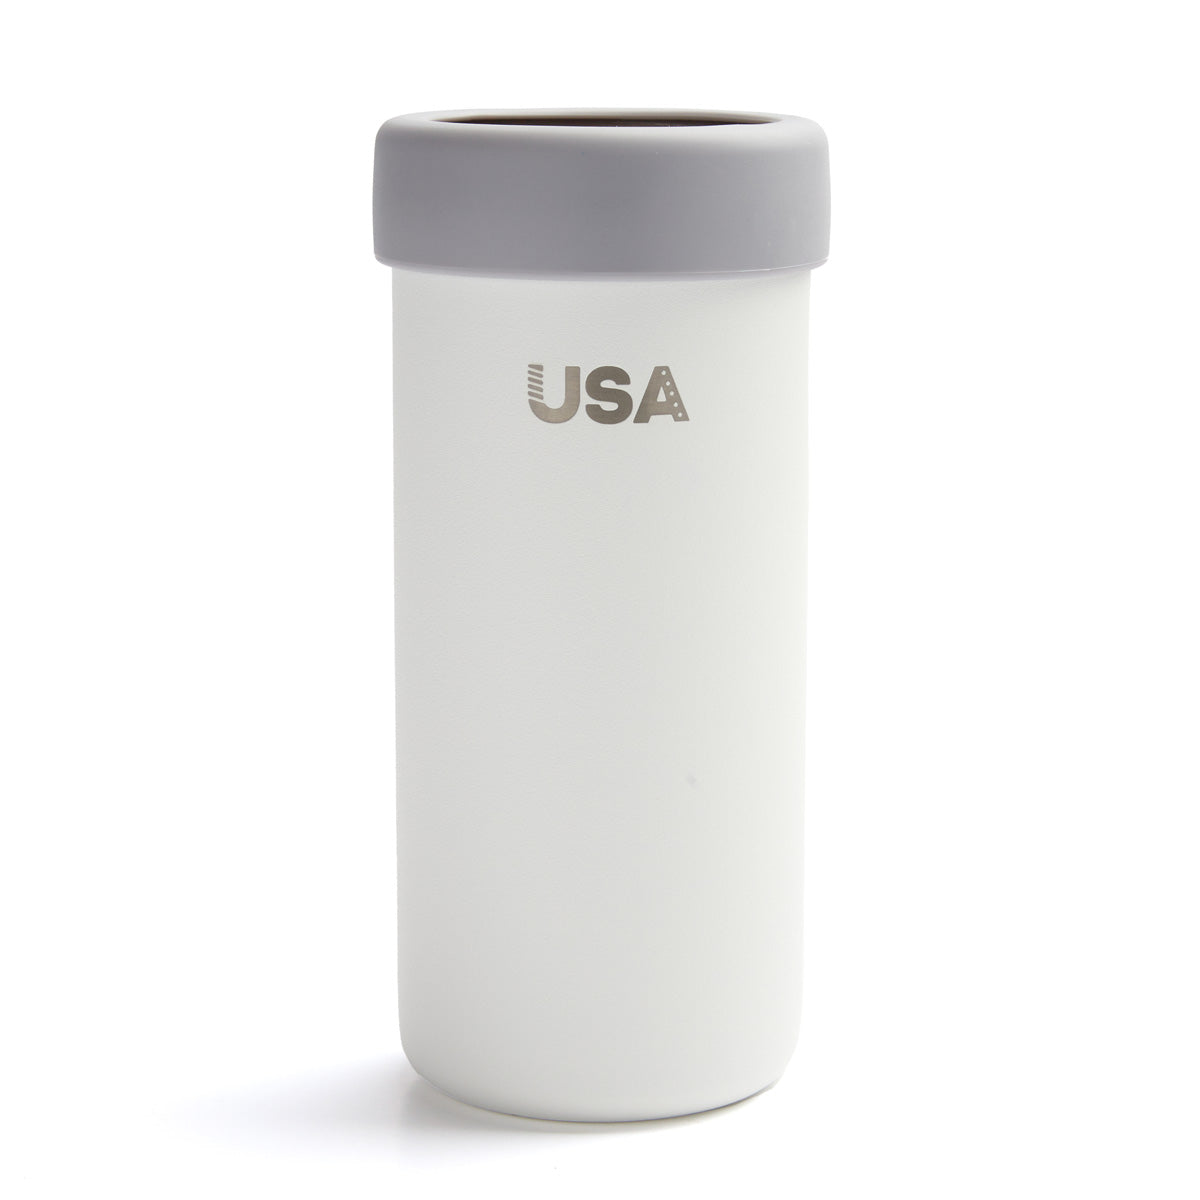 HYDRO FLASK SLIM 12 OZ COOLER CUP SEAGRASS - Pee Dee Outfitters